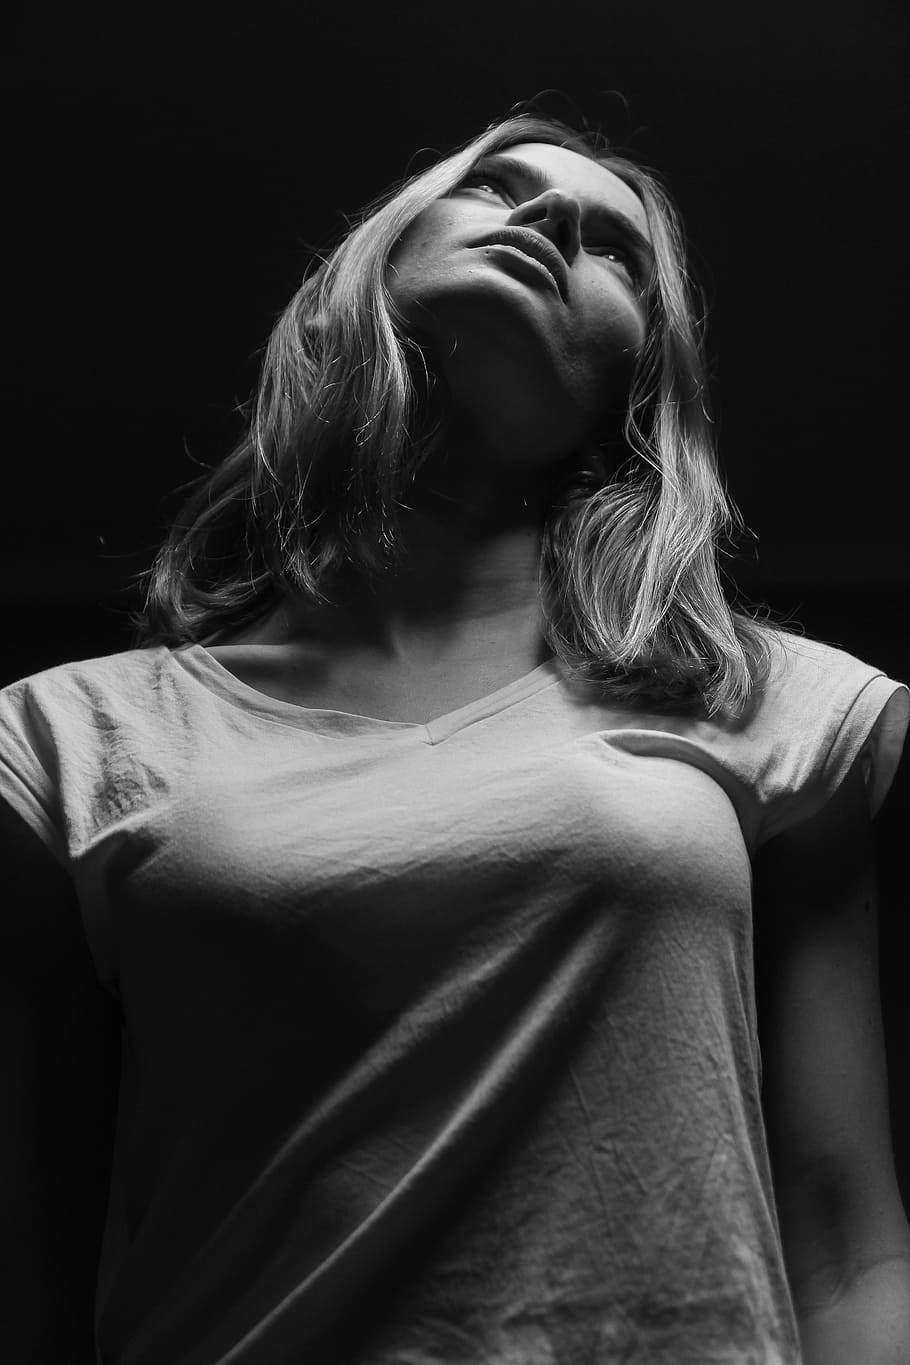 Royalty-Free photo: Grayscale photo of woman wearing button-up top